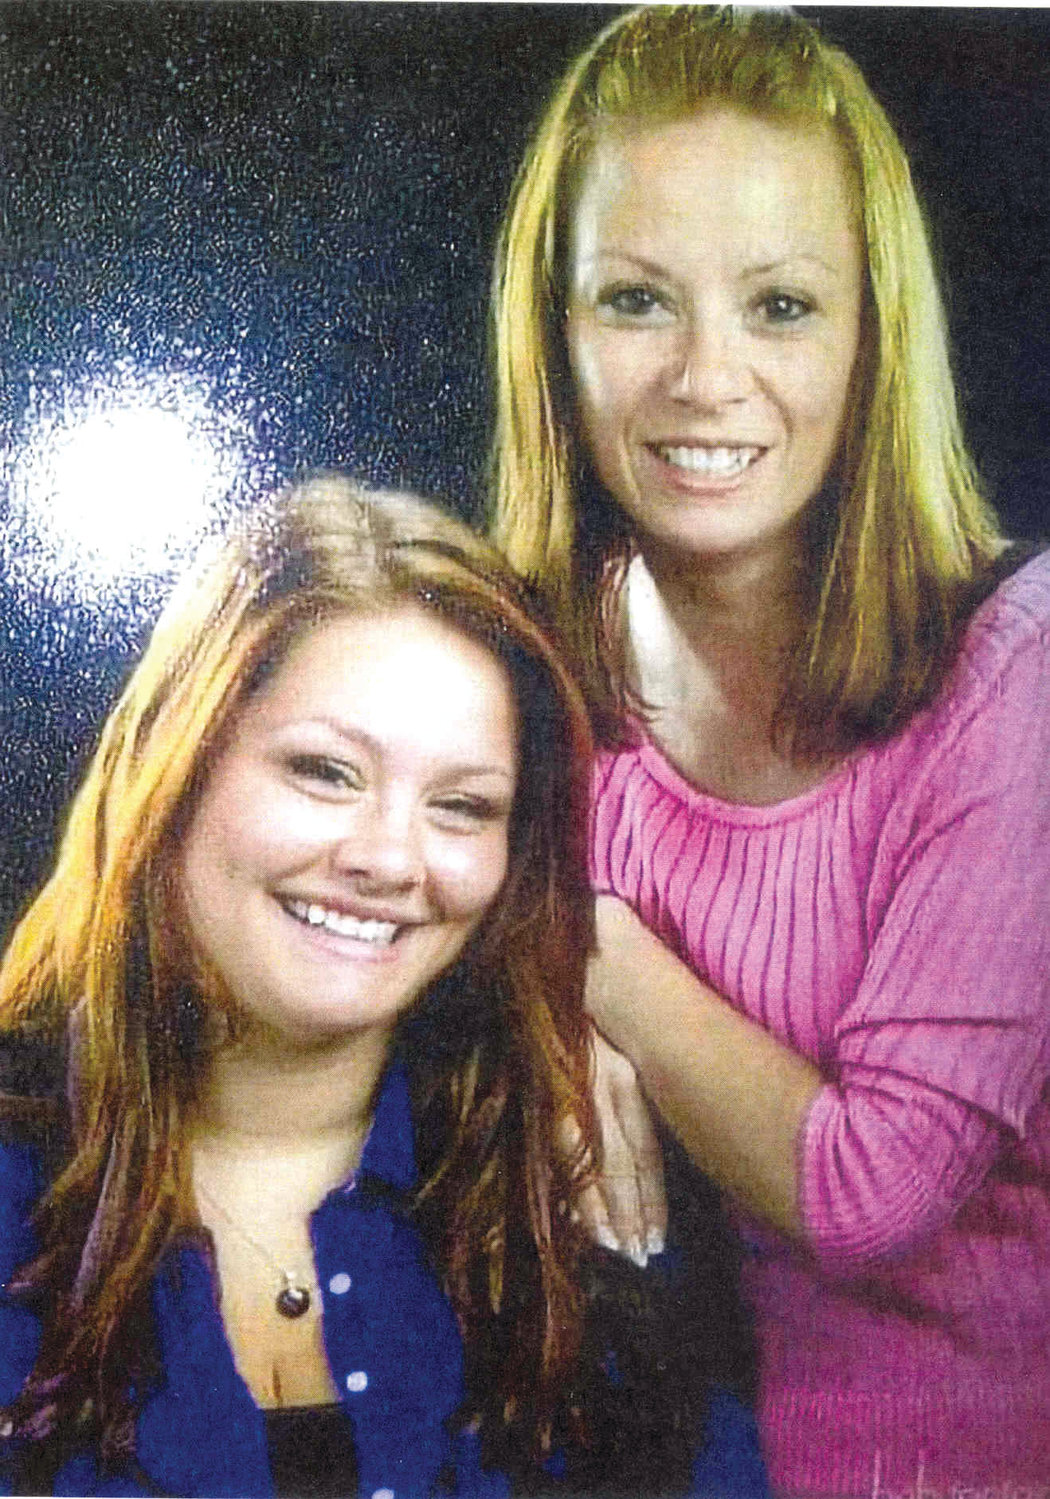 Destiny and her mother Missy as pictured in 2003.